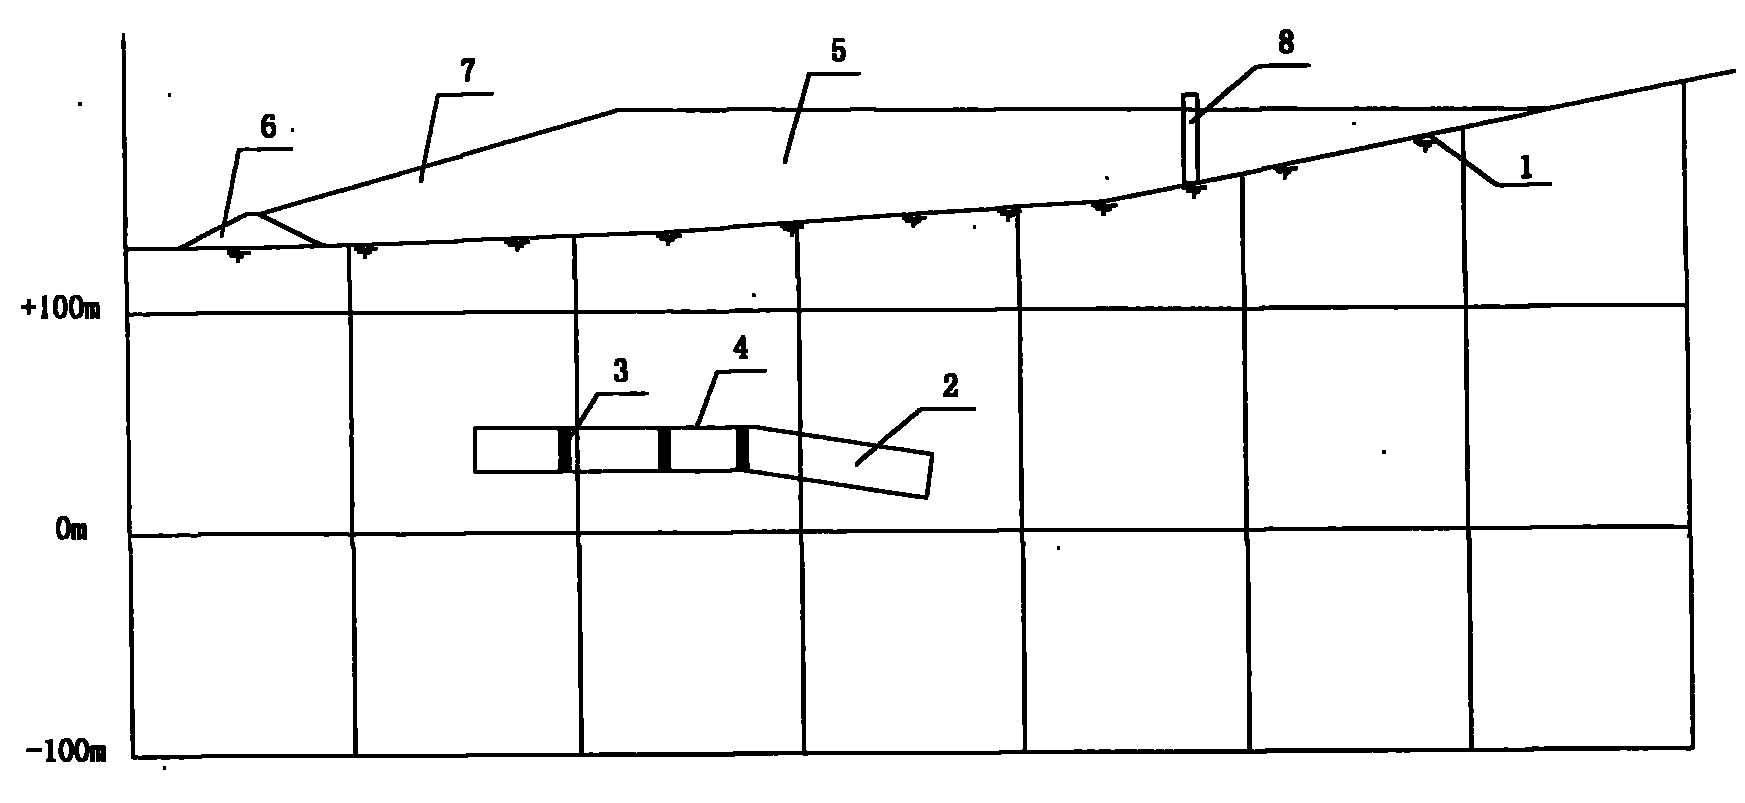 Method for directly building tailing ponds without filling positions above goaf